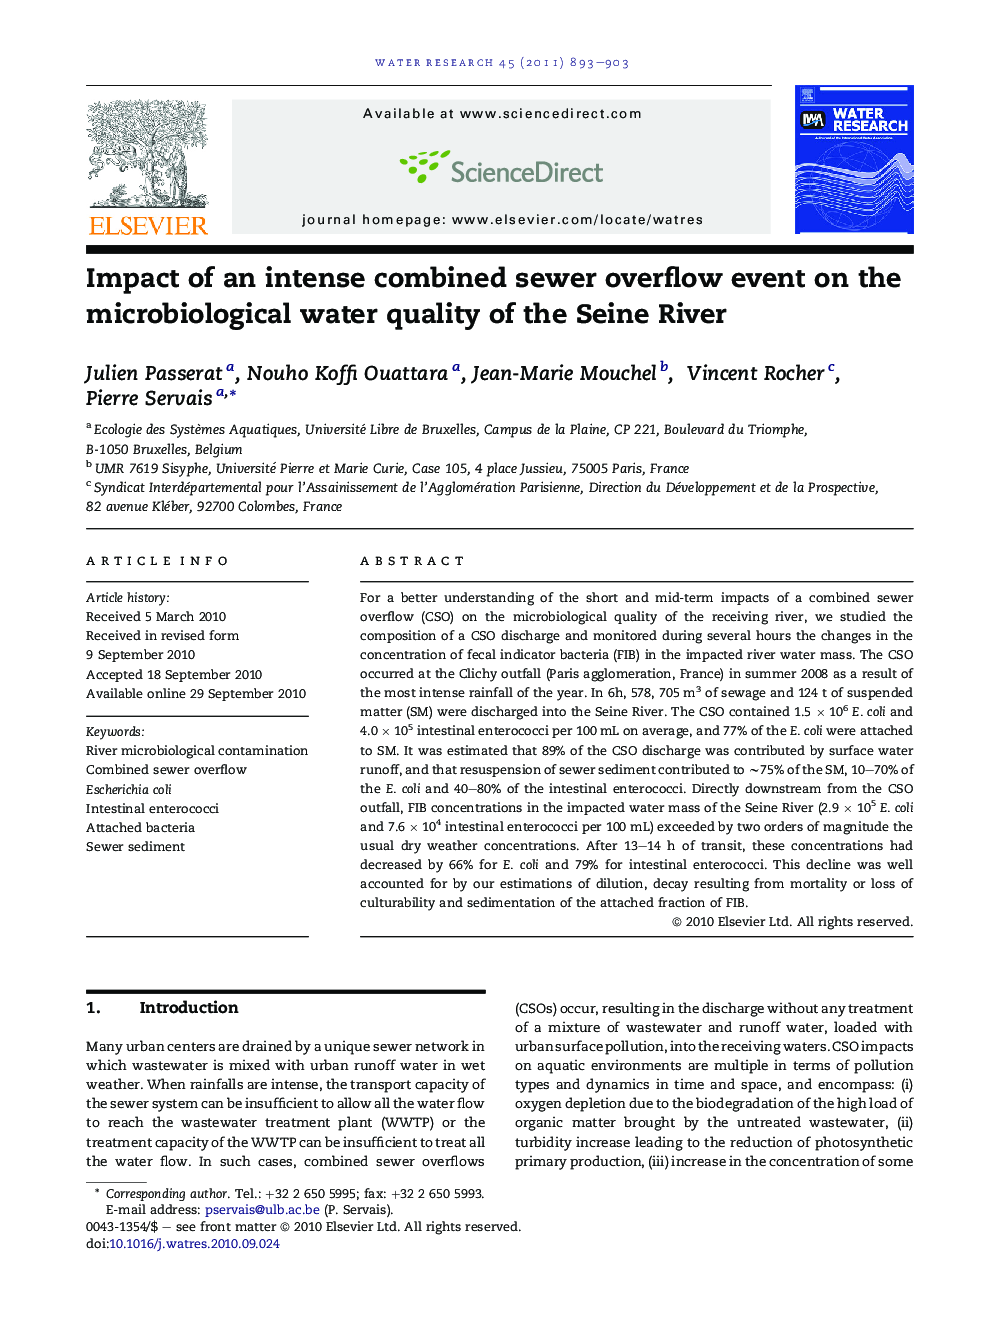 Impact of an intense combined sewer overflow event on the microbiological water quality of the Seine River